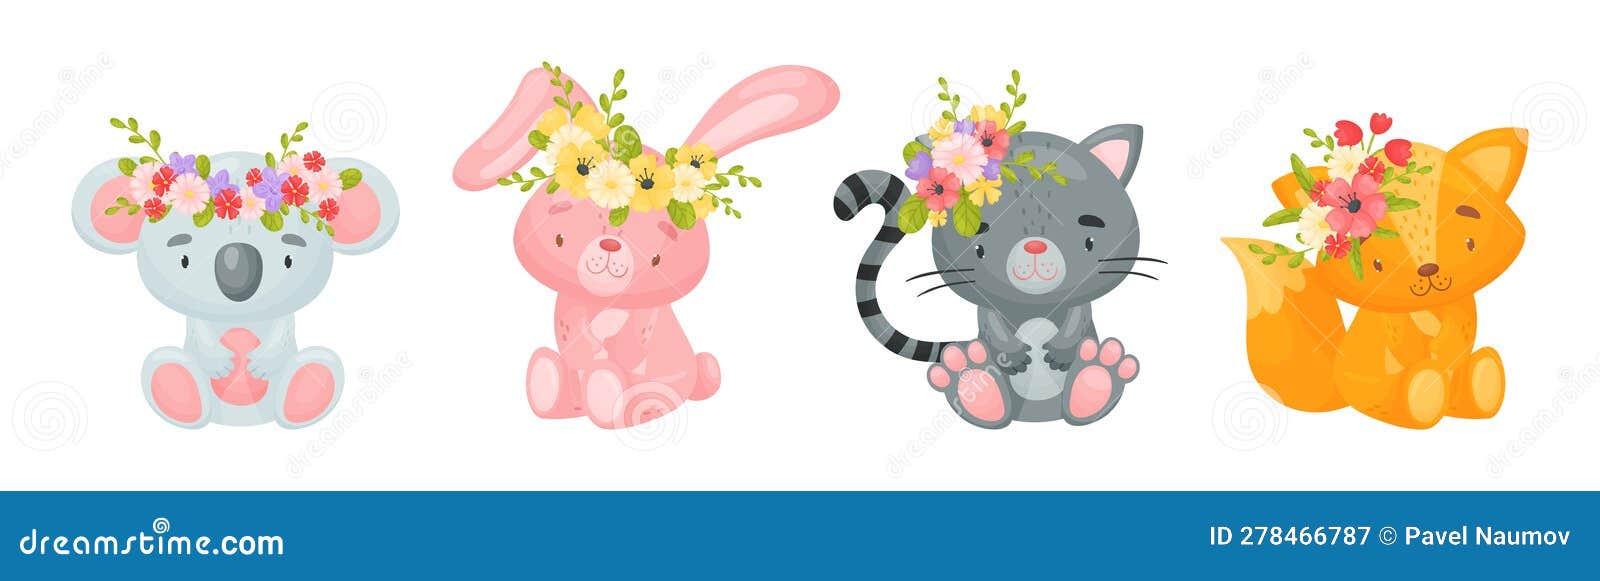 Cute Animals with Flower Wreath and Adornment on Their Head Vector Set ...